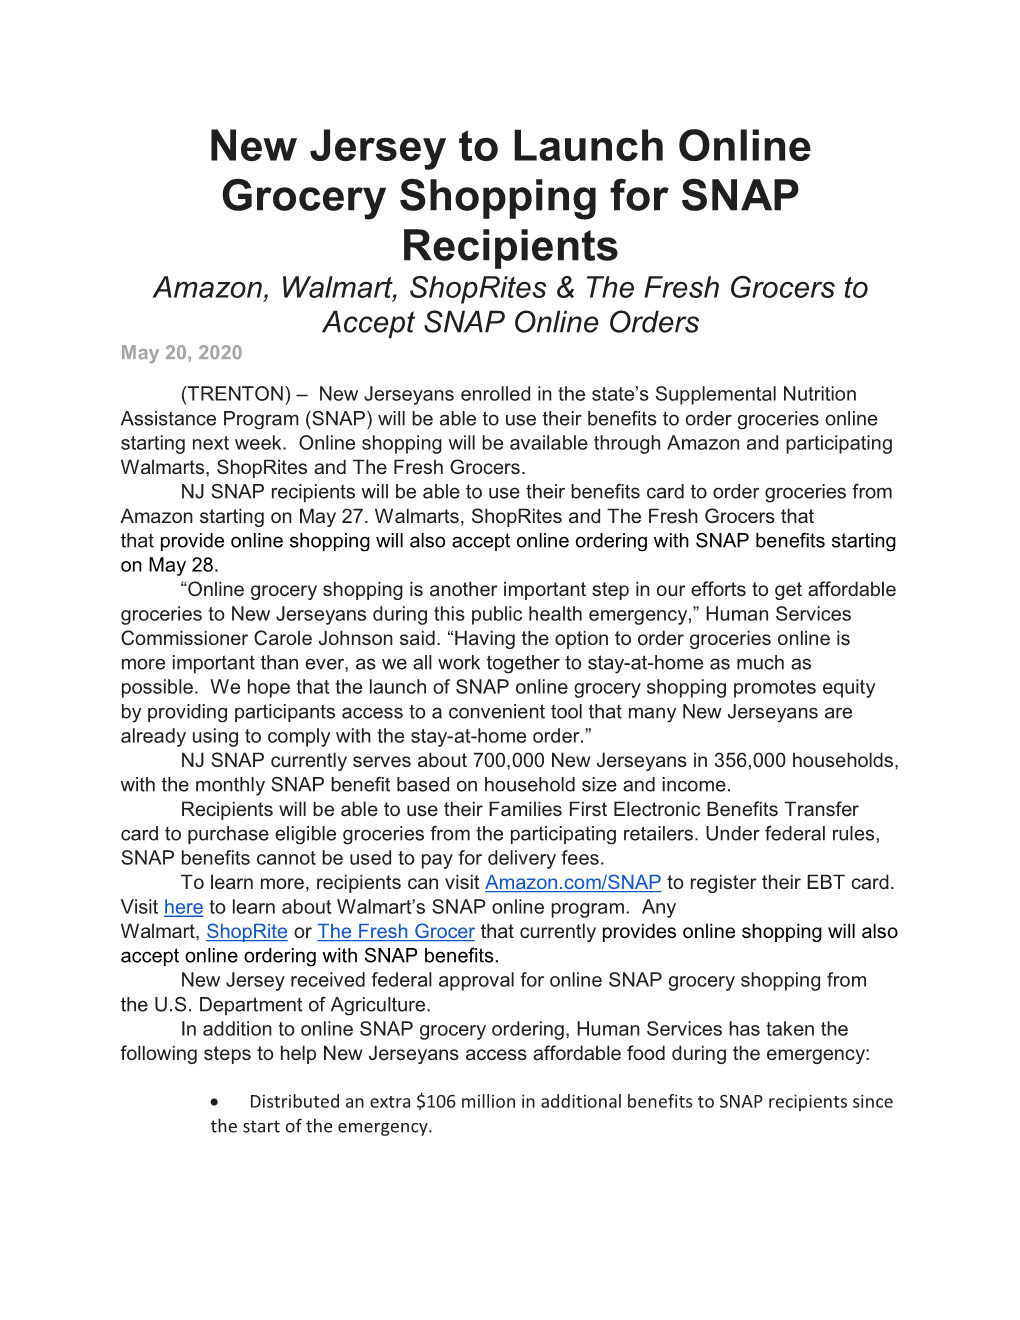 New Jersey to Launch Online Grocery Shopping for SNAP Recipients Amazon, Walmart, Shoprites & the Fresh Grocers to Accept SNAP Online Orders May 20, 2020